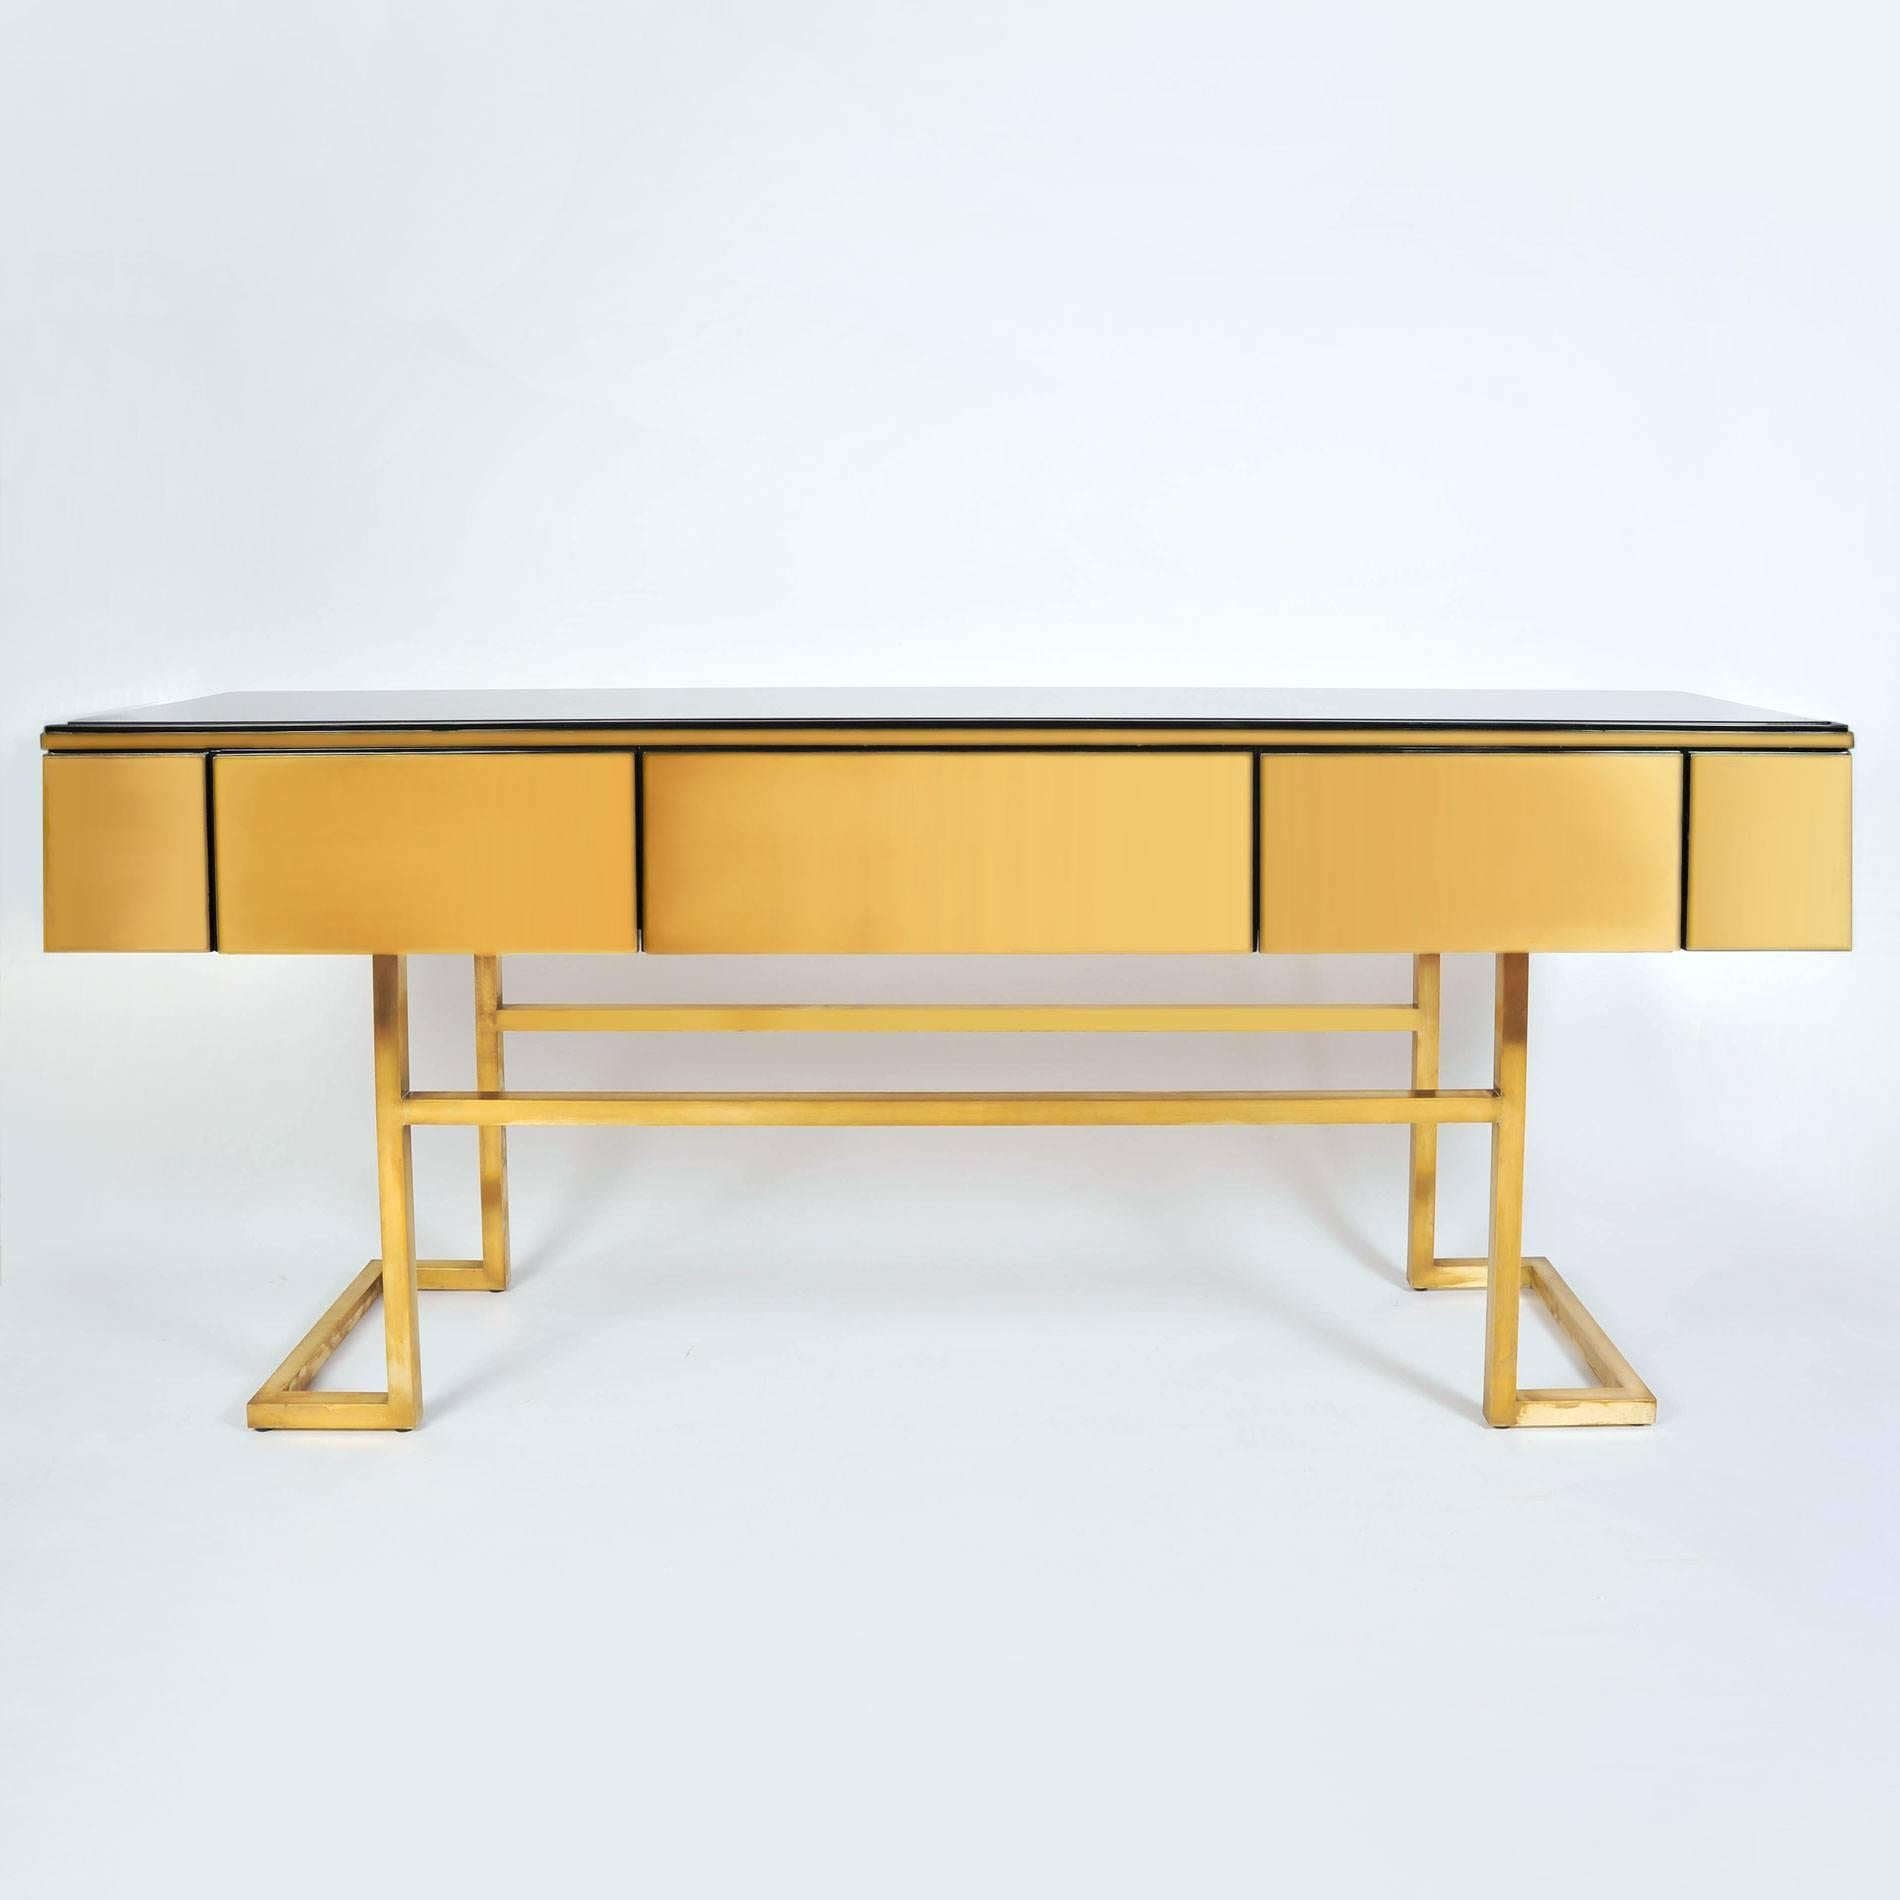 Super chic extra long sideboard with three rich brass drawers and side panels all supported on sleek brass legs. The contrasting top is glossy black lacquer under a protective glass top.